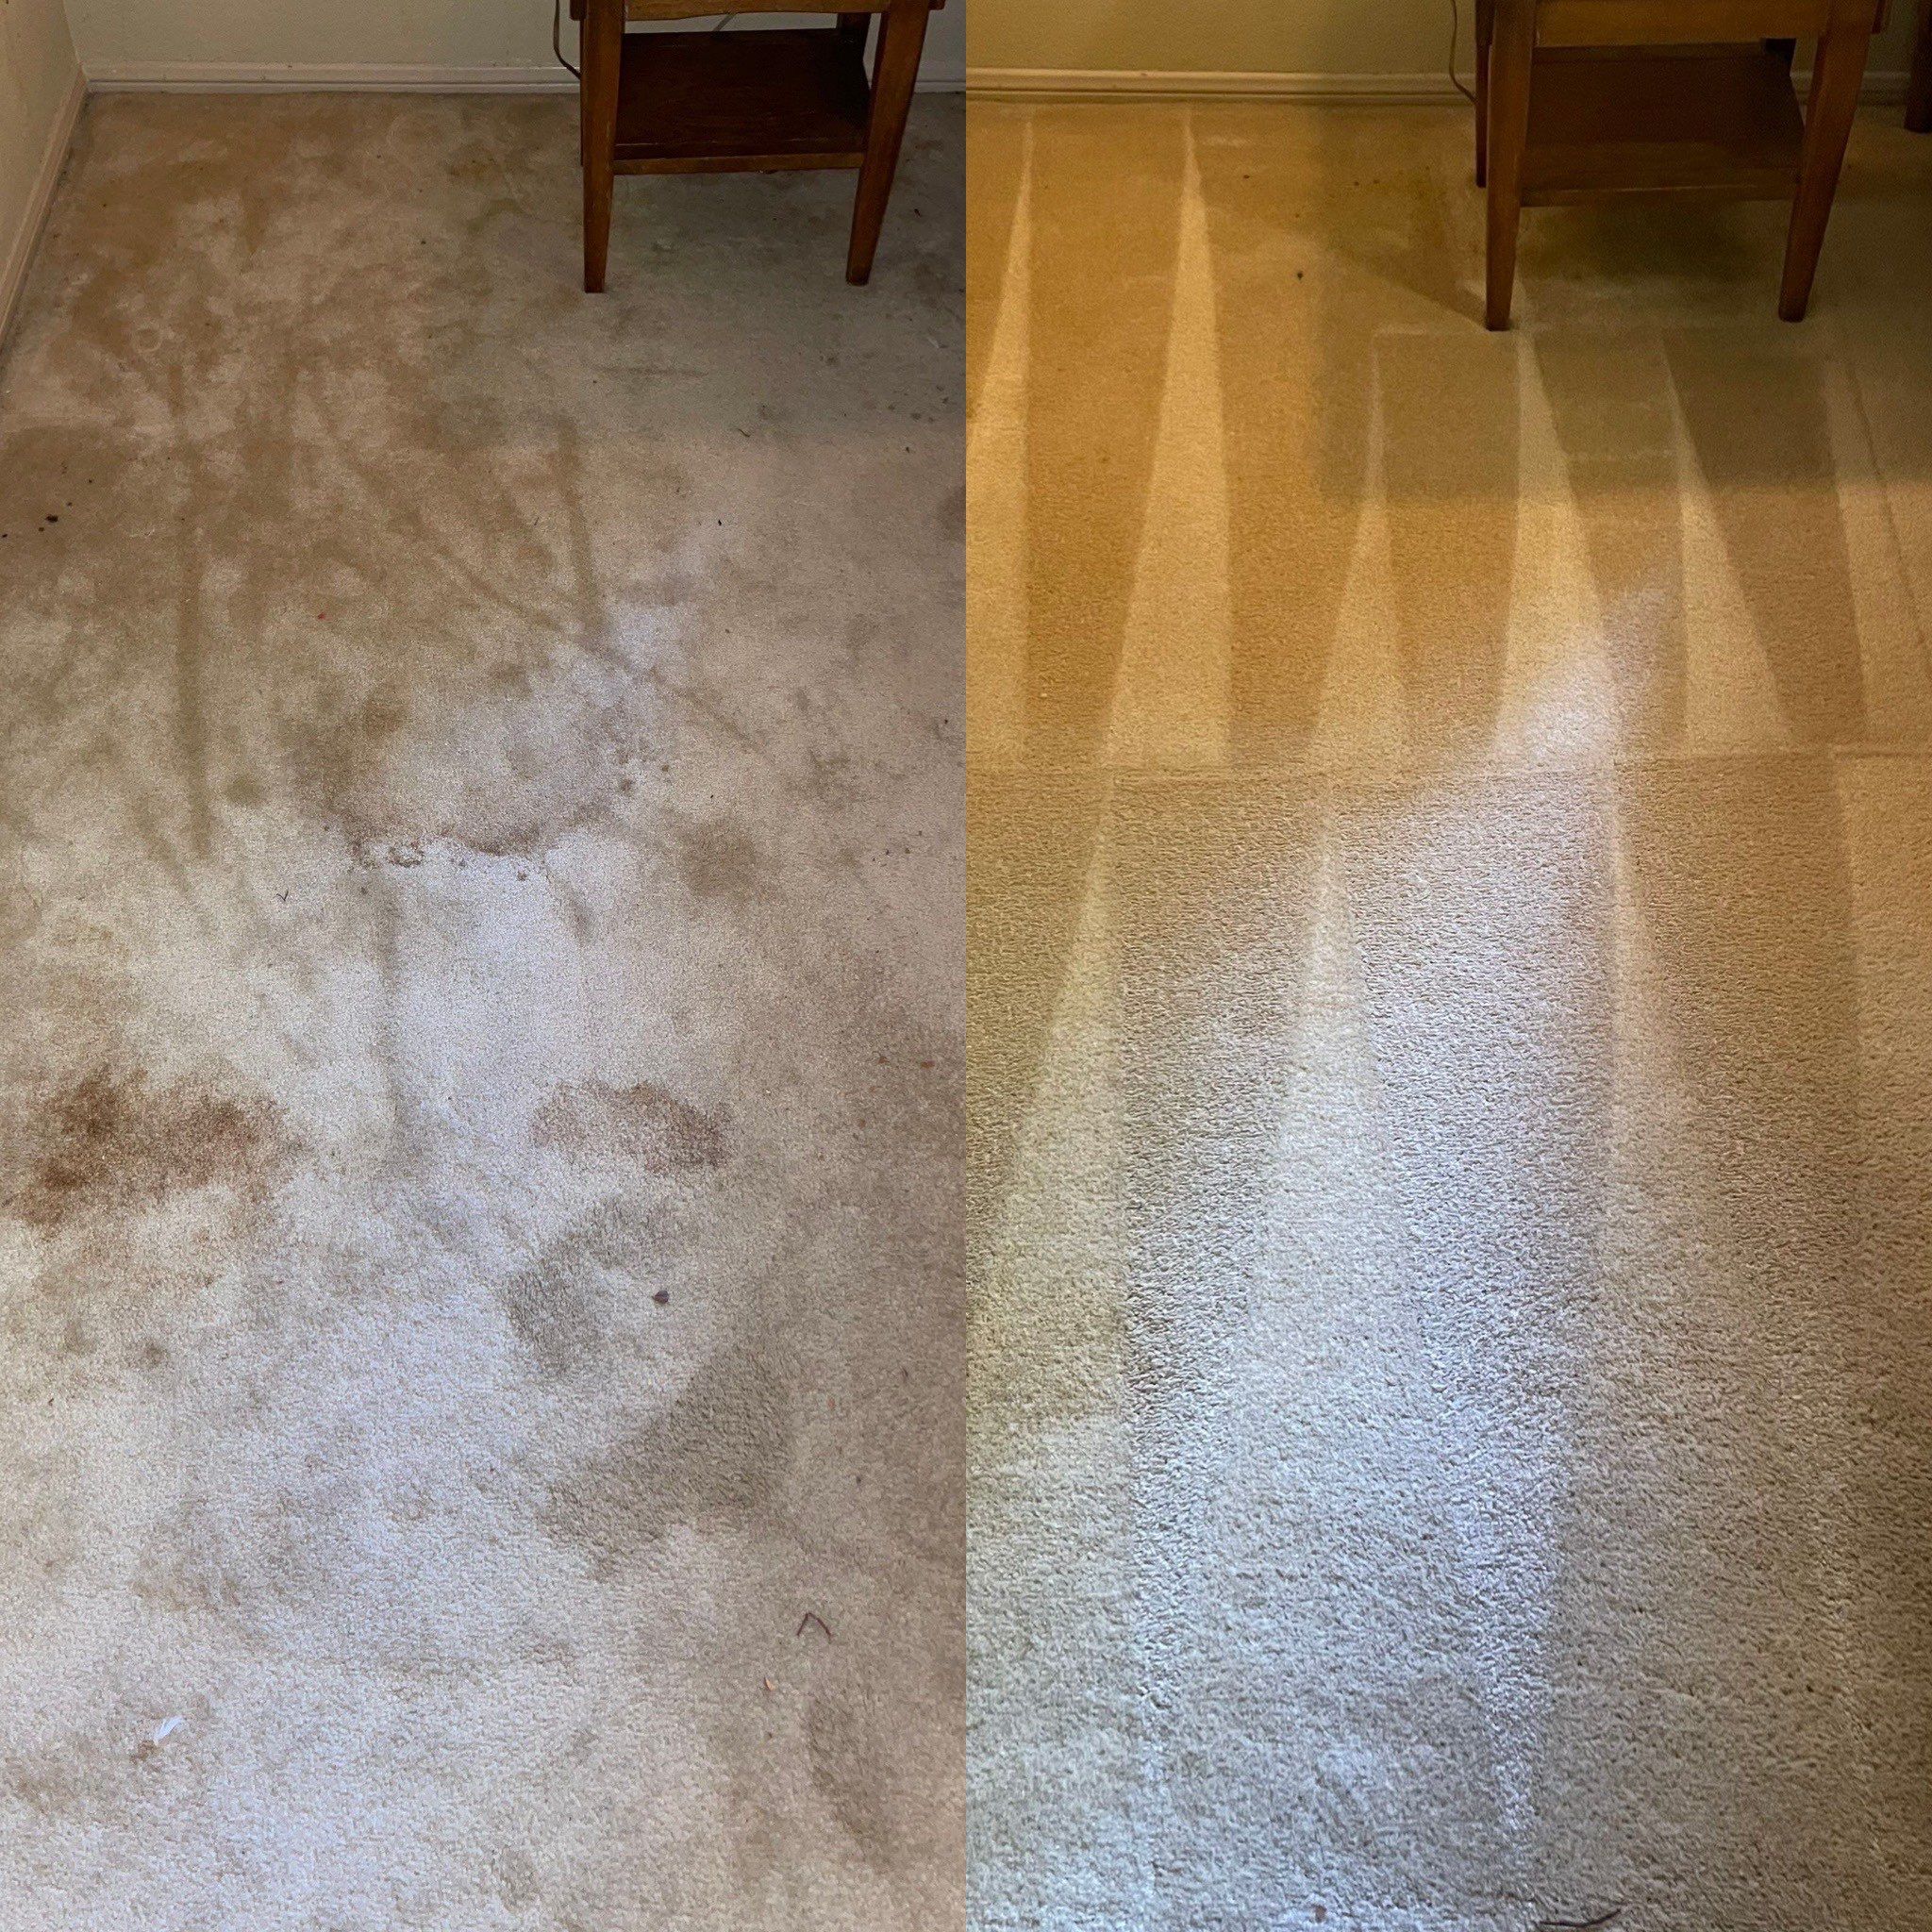 professional carpet cleaning transformed a heavily stained carpet into a clean and fresh looking surface in san antonio